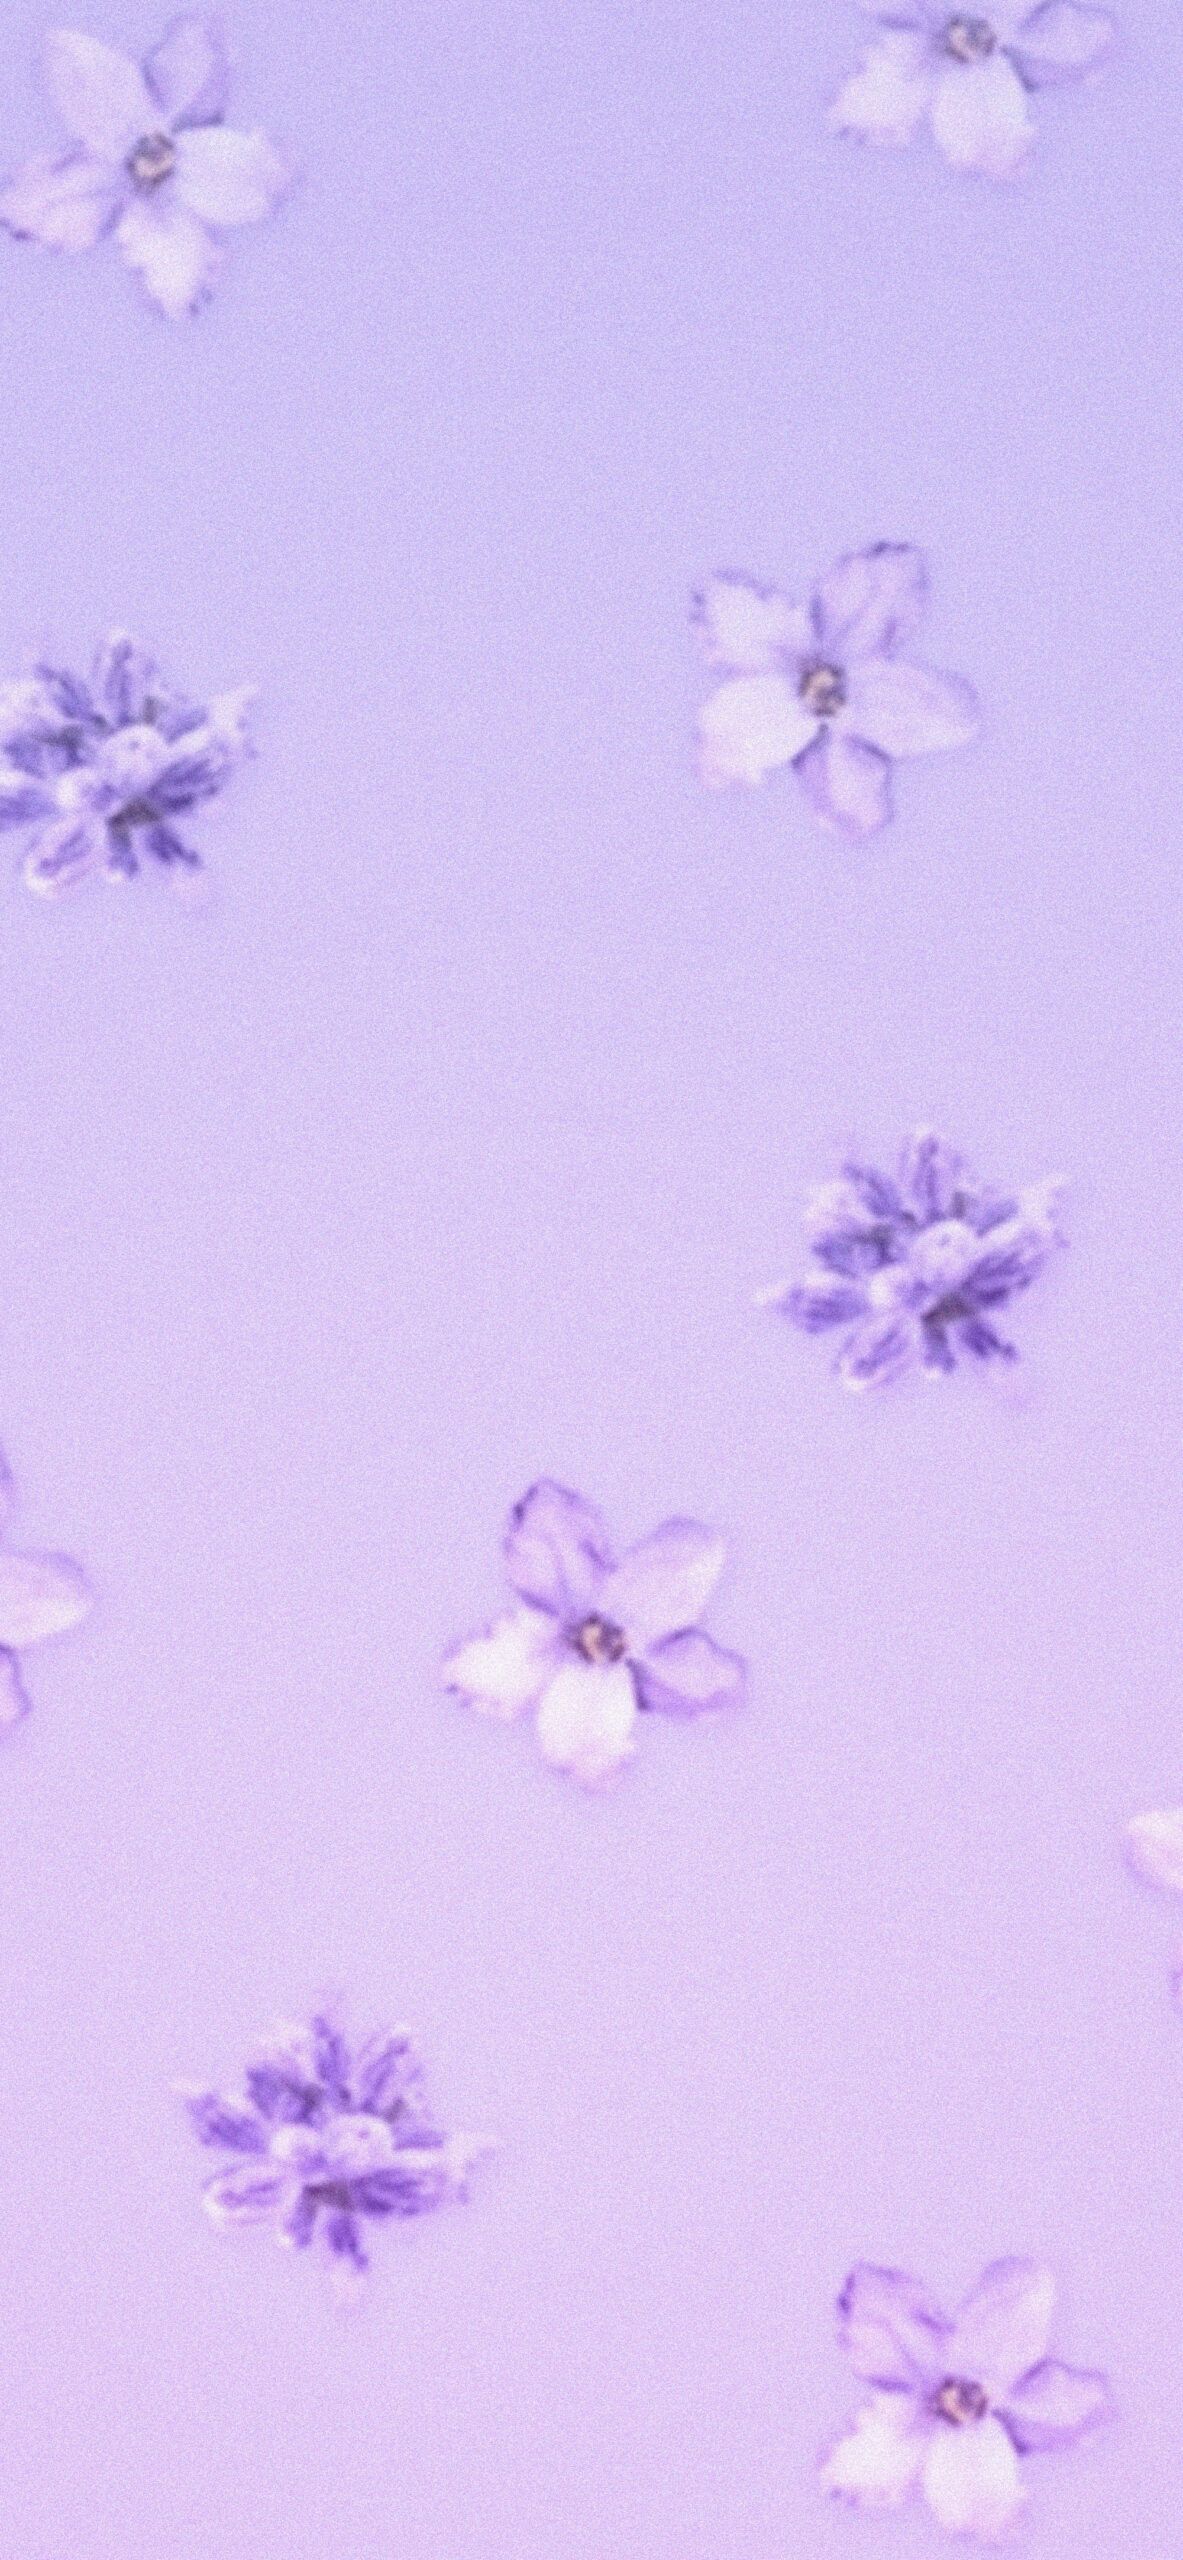 A close up of some flowers on the ground - Lavender